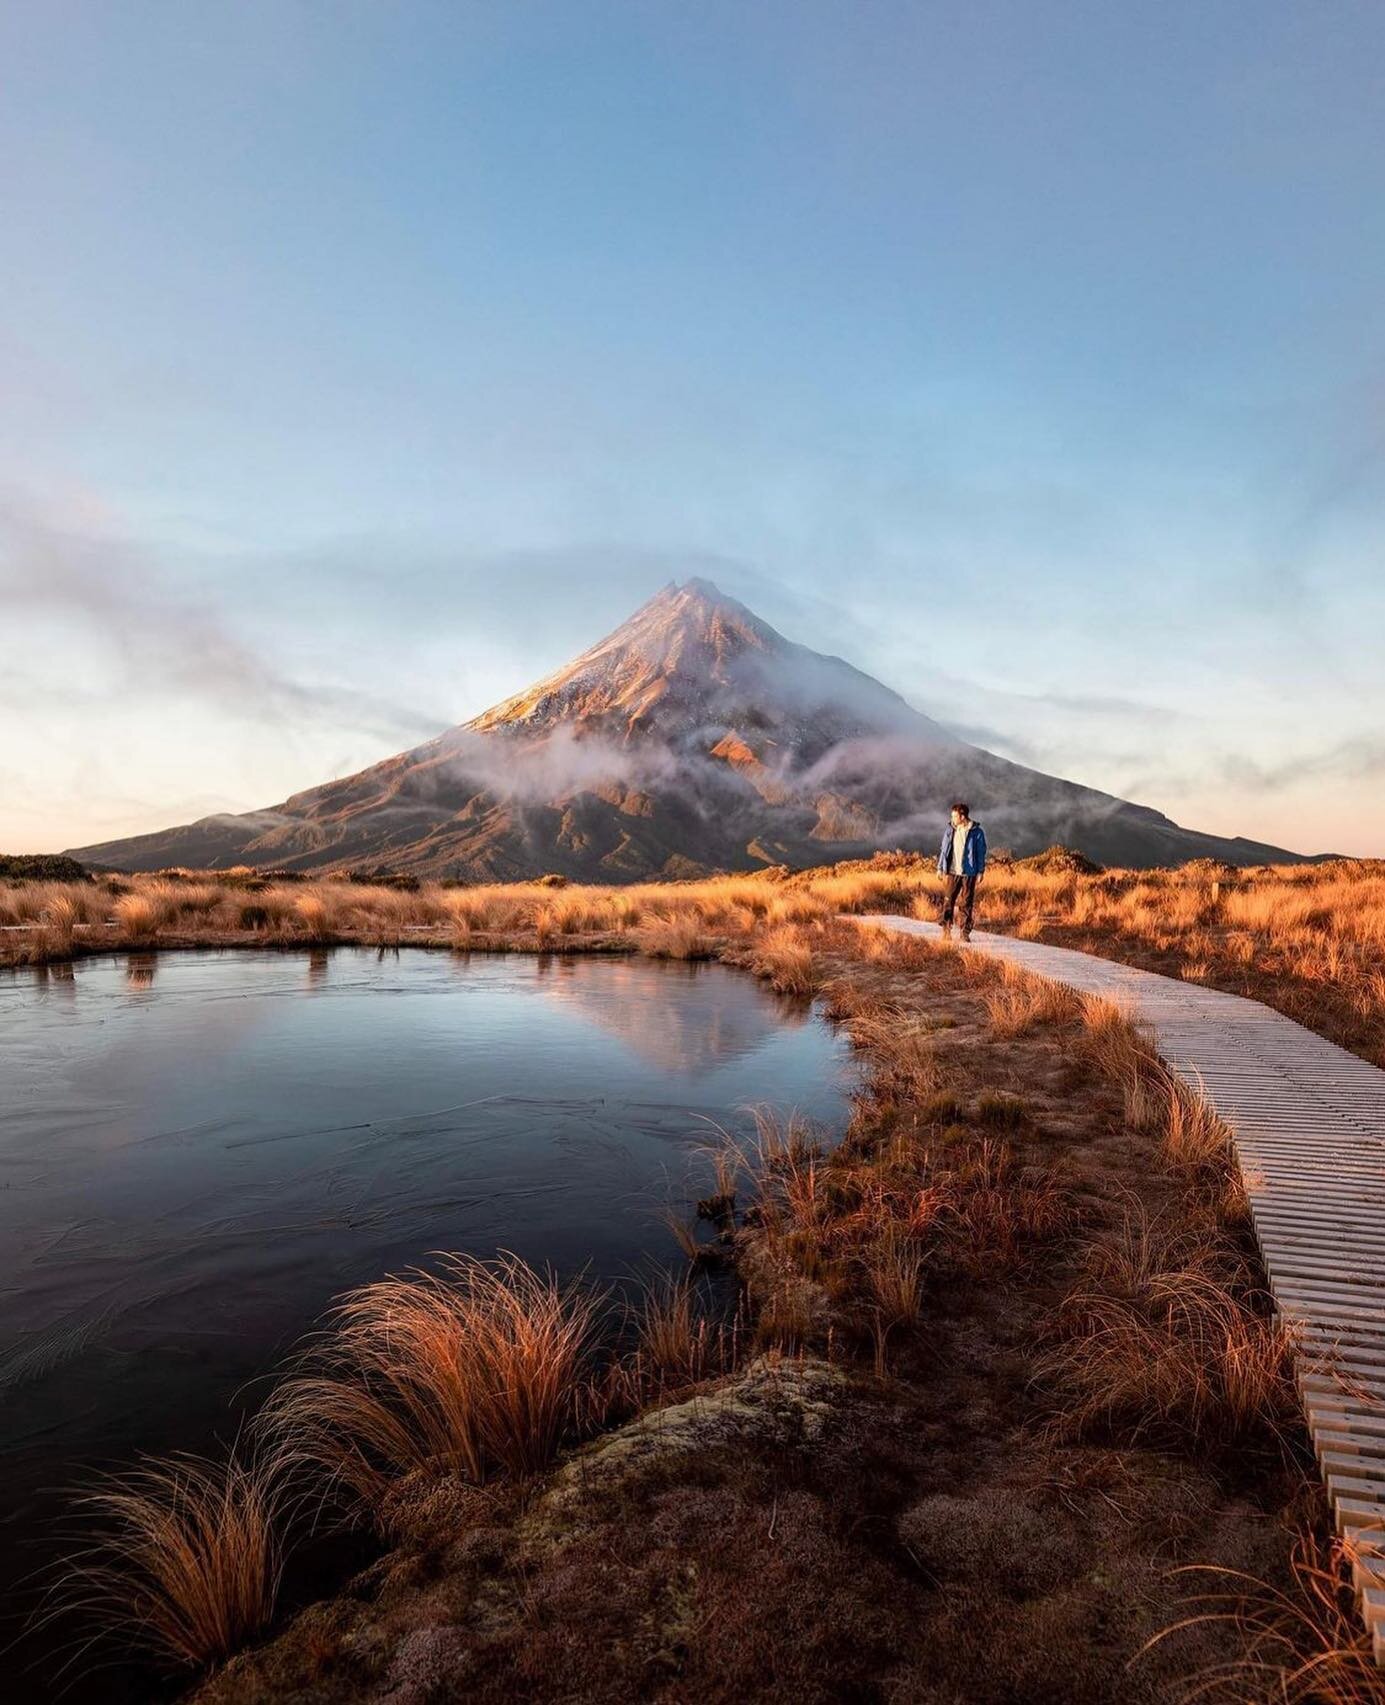 The glorious snow-capped volcanic cone of Mt Taranaki on New Zealand's north island. The picturesque summit climb will take approx. 6 hours or explore dozens of alternative trails around the dormant giant.
#ExclusiveTravelGroupNZ
📸: @olsson.adventur